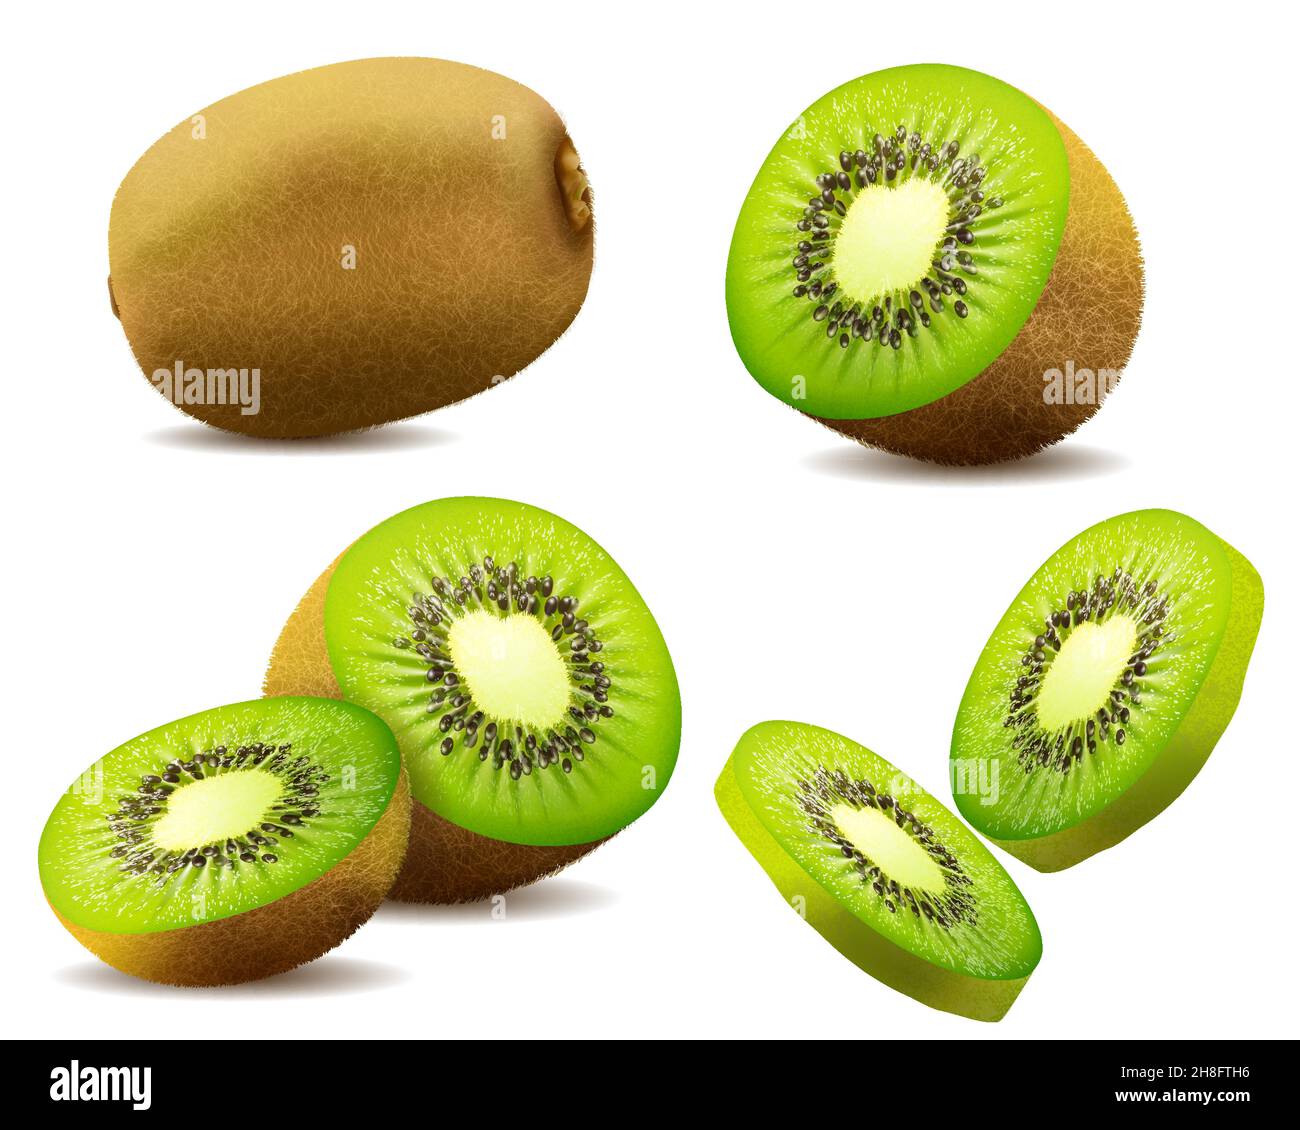 https://c8.alamy.com/comp/2H8FTH6/realistic-kiwi-juicy-exotic-whole-fruit-half-and-slice-fresh-organic-food-for-healthy-eating-ripe-tropical-berry-for-sweet-dessert-vector-3d-des-2H8FTH6.jpg